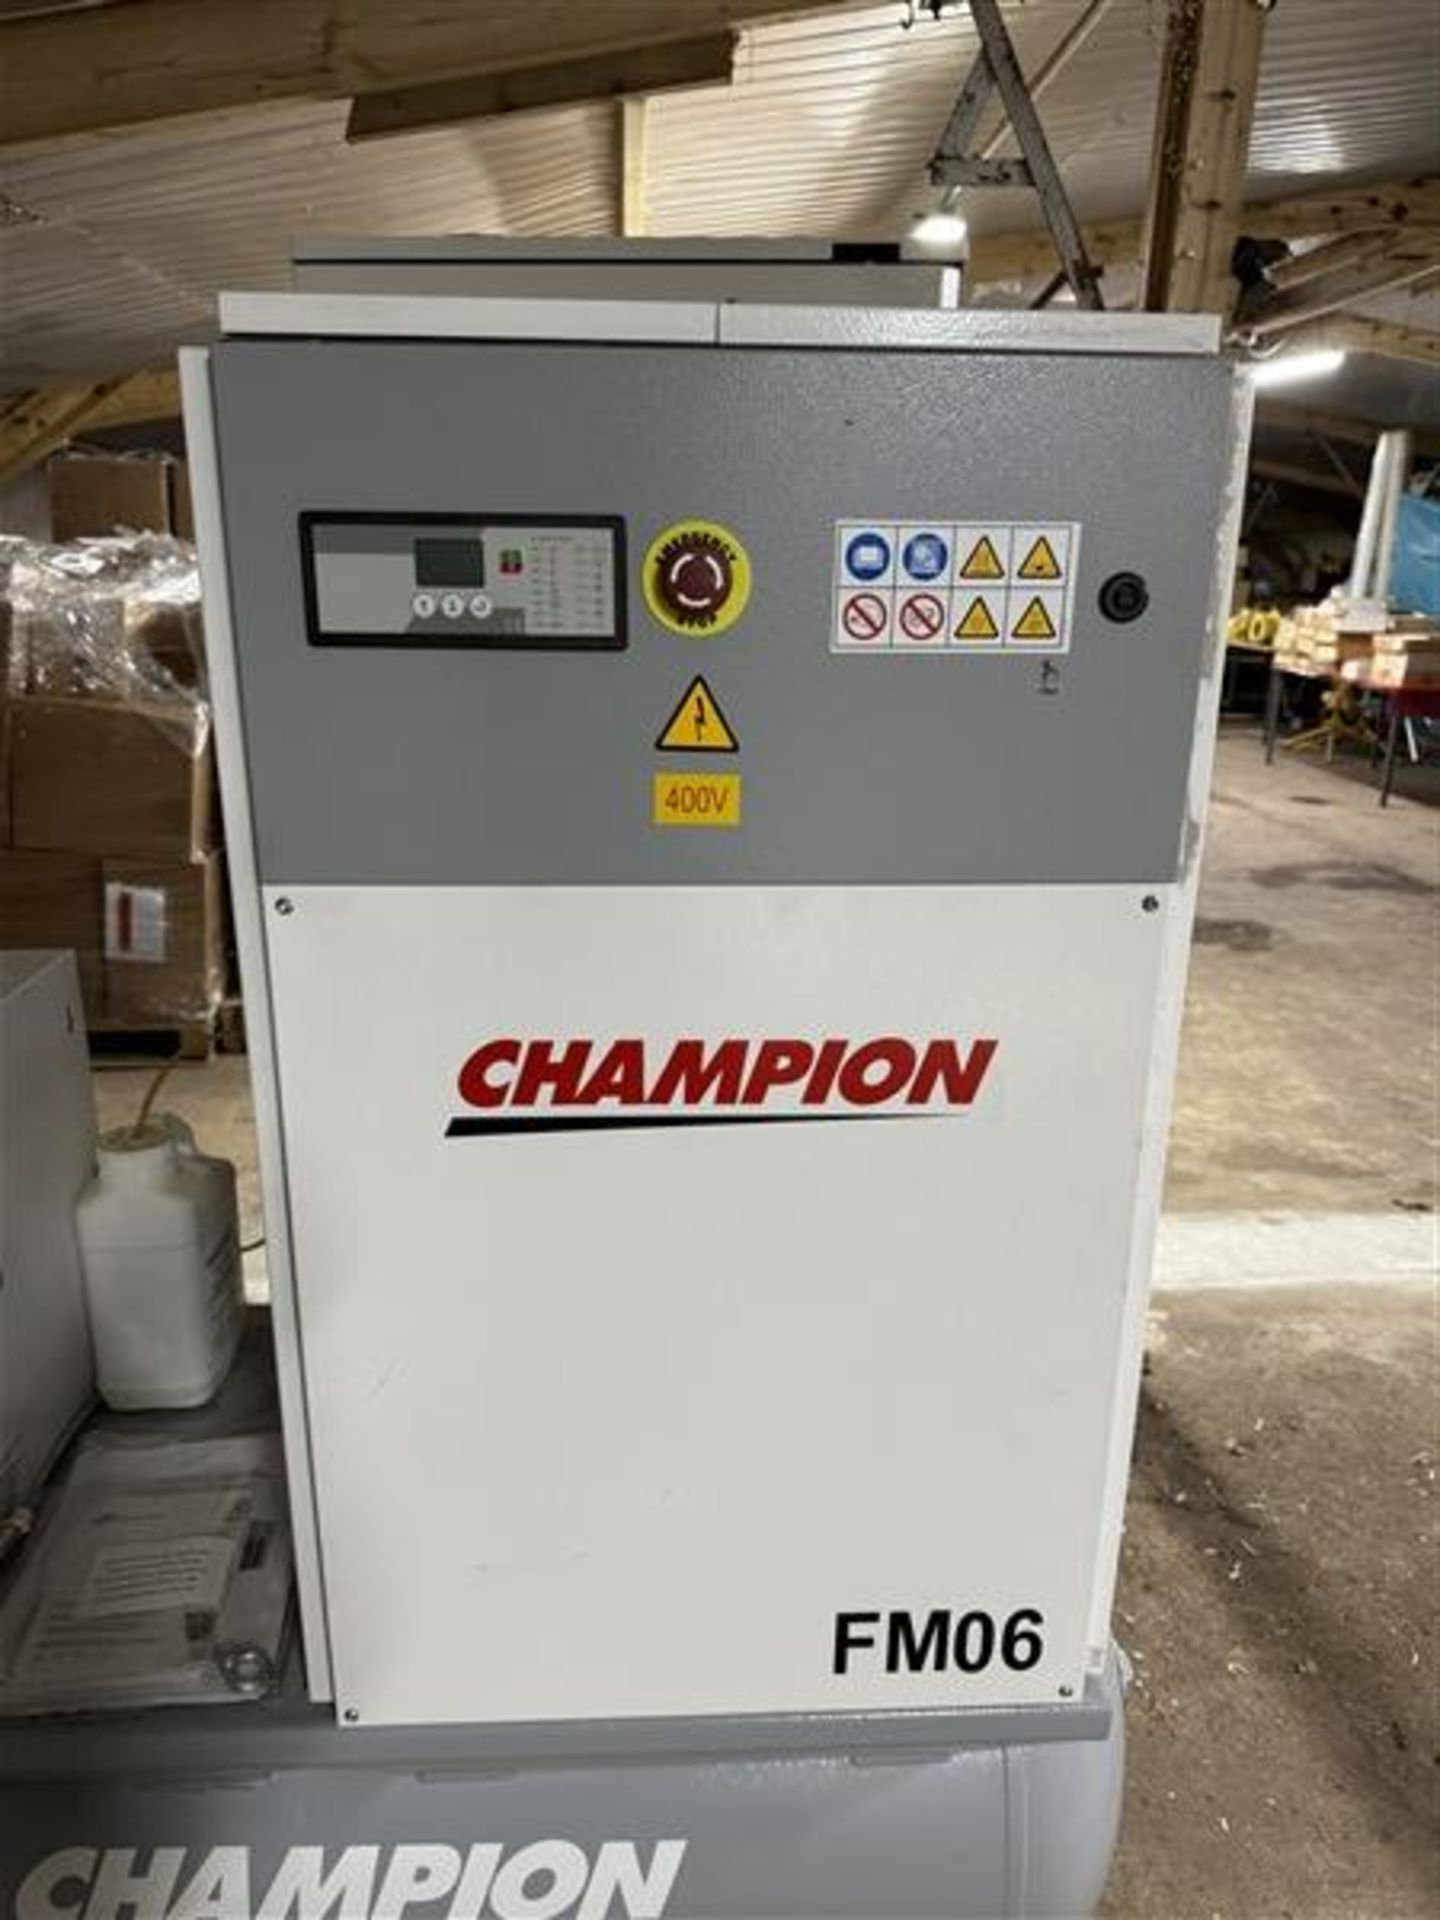 Champion FM06 compressor 400/50 V/H2, year: 2021 (Please note, this LOT is subject to acceptance - Image 2 of 8